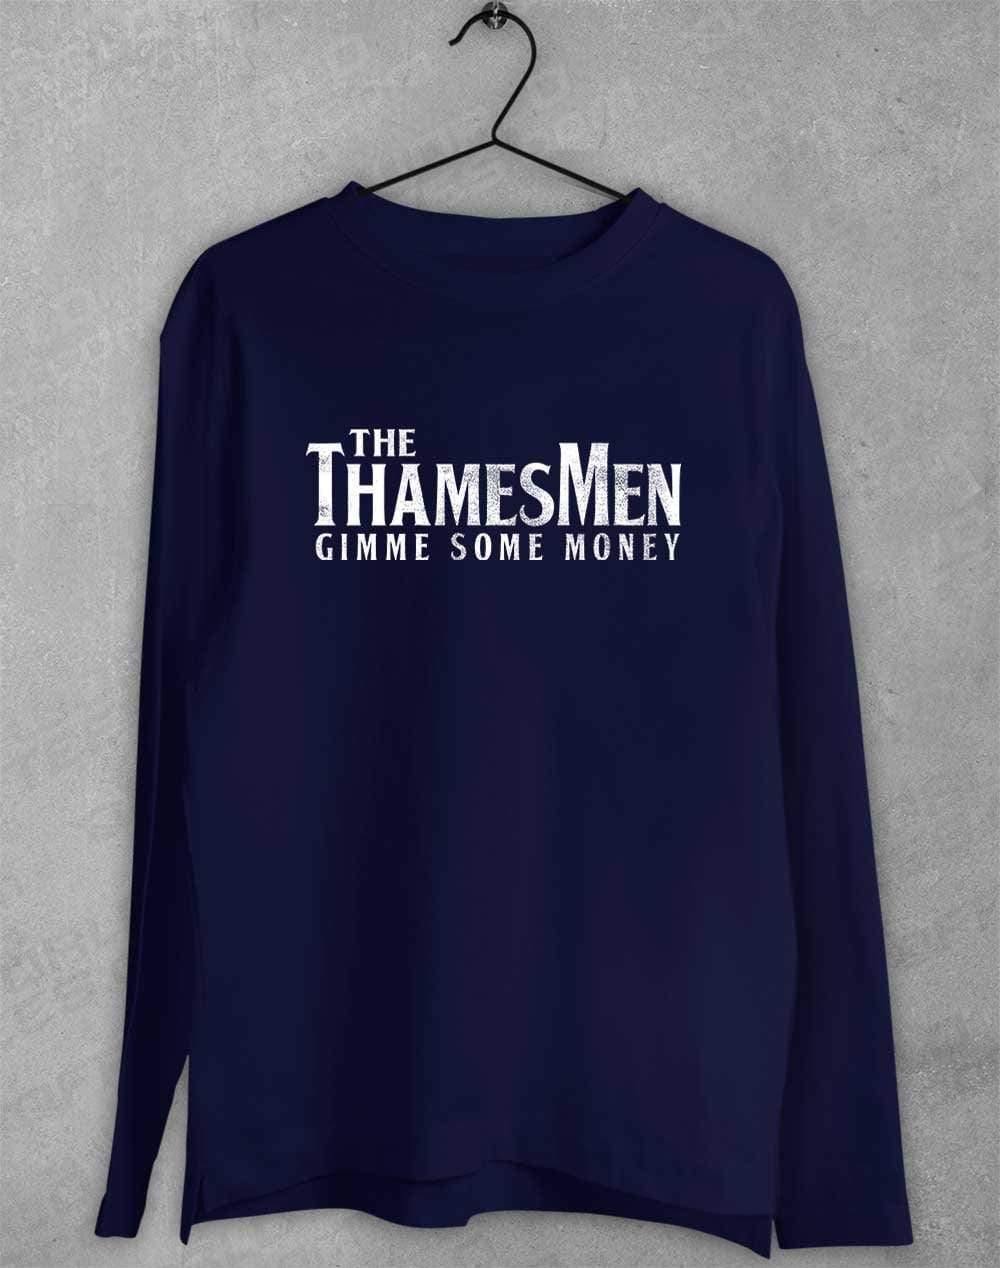 The Thamesmen Gimme Some Money Long Sleeve T-Shirt S / Navy  - Off World Tees